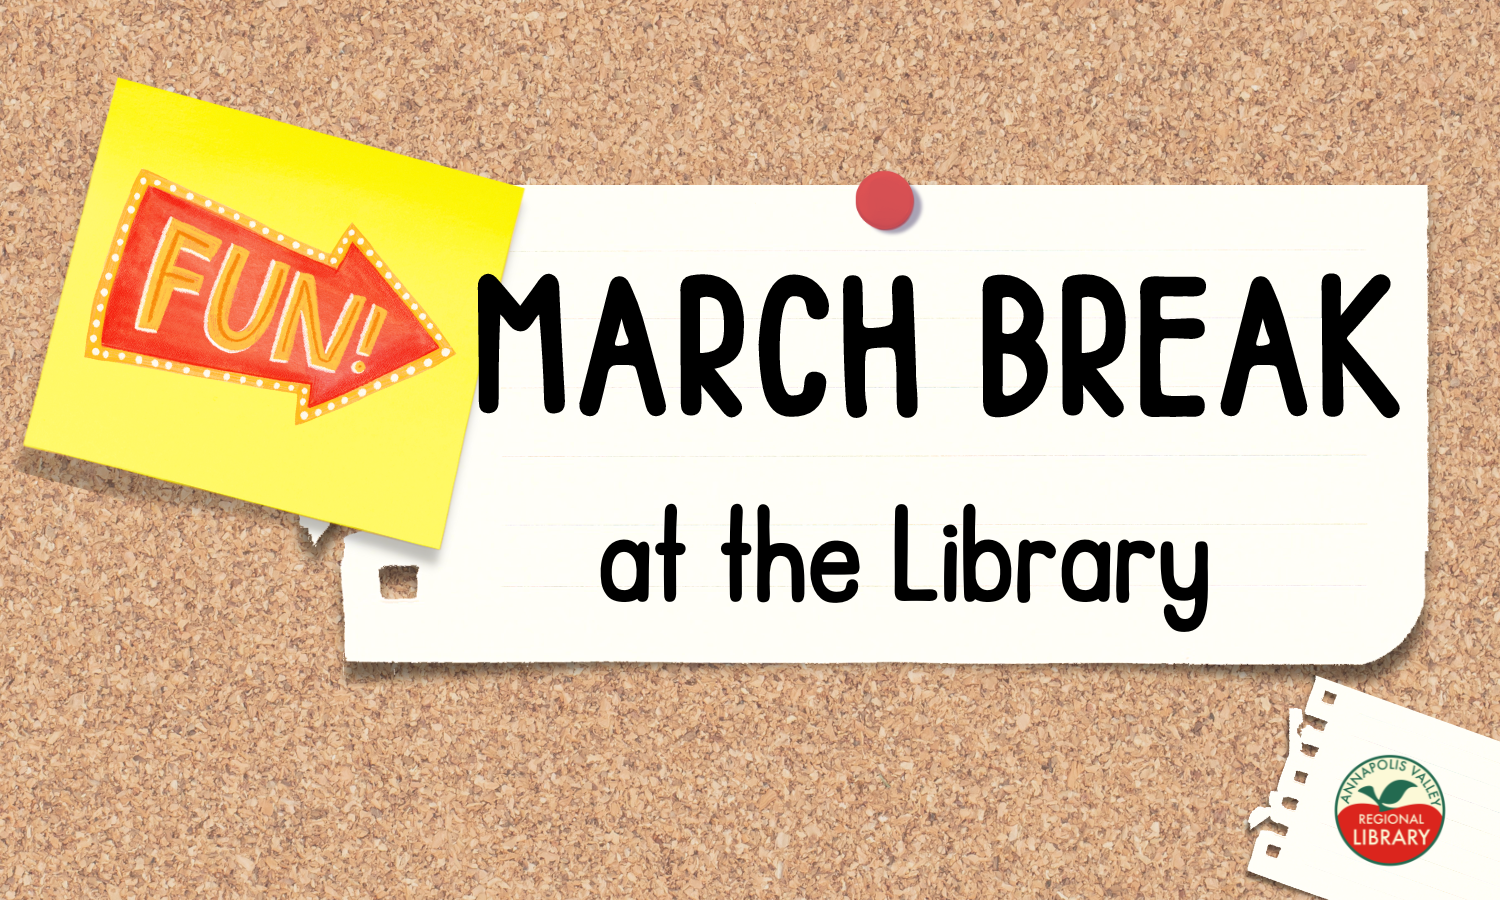 Graphics- a sticky note that says "Fun!" and a piece of paper tacked onto a bulletin board background that says, "March Break at the Library".